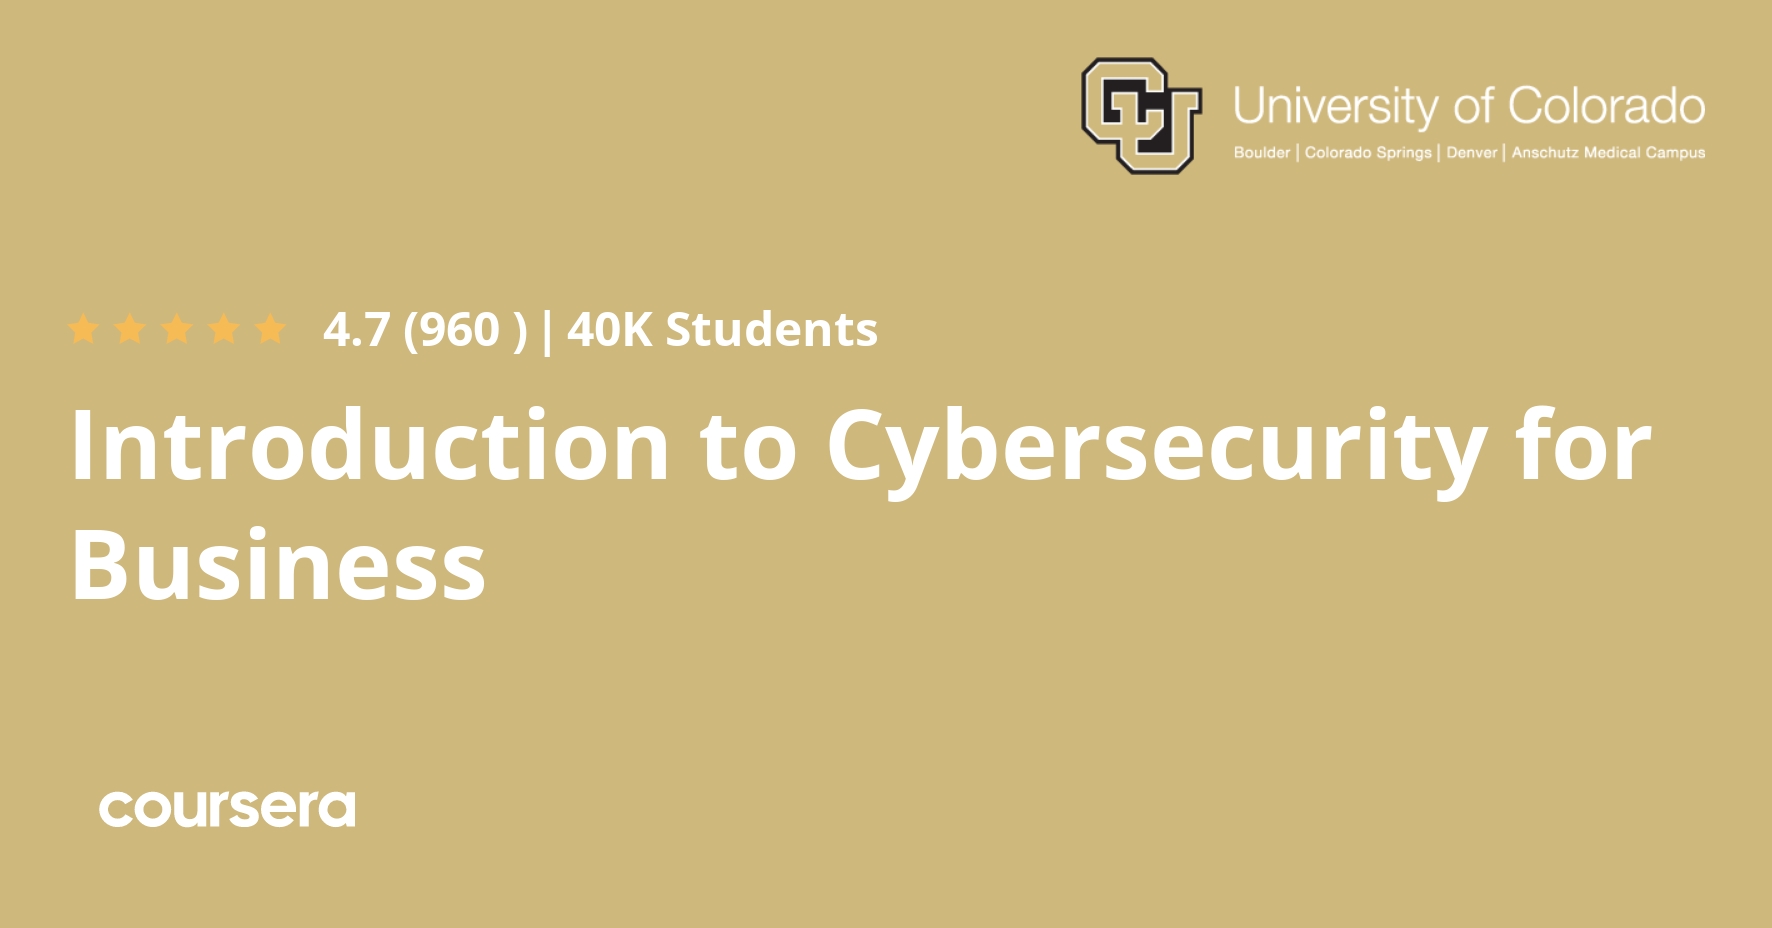 Introduction to Cybersecurity for Business by The University of Colorado via edX